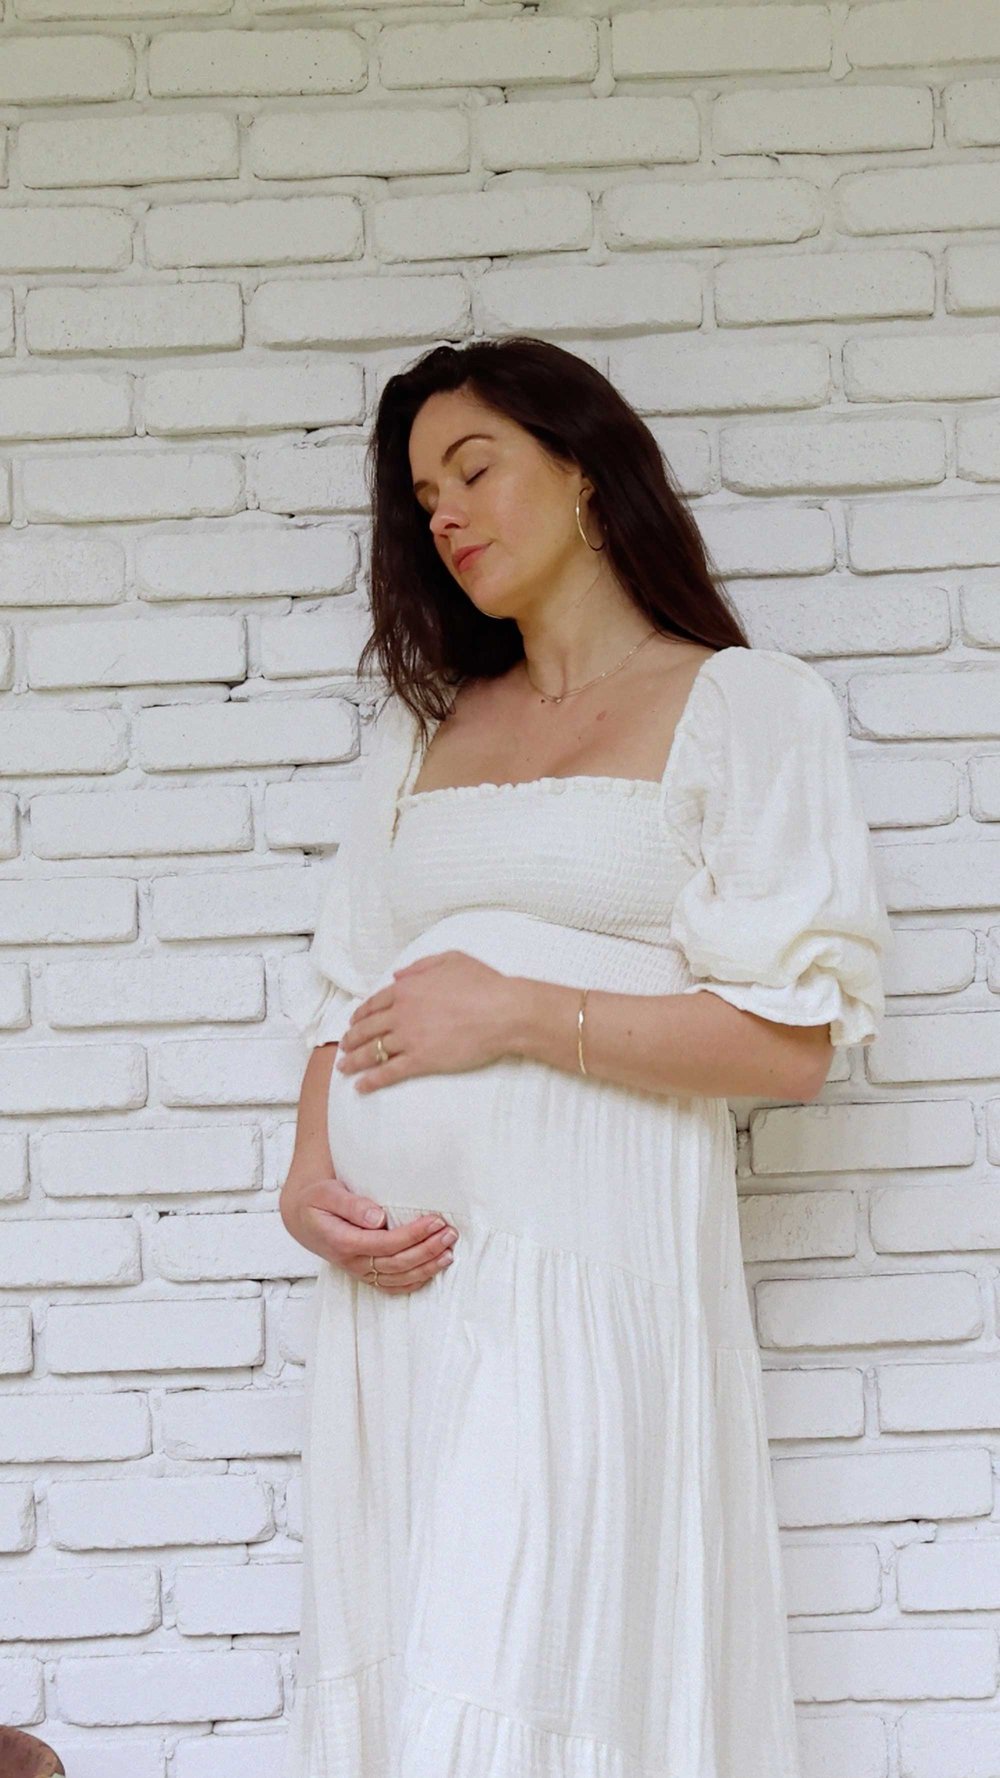 Cute cottage style summer maternity dress. @sarahchristine wearing Nothing Fits But Kiko Dress Soft muslin dress with puffed sleeves, smocked chest and sleeves in Seattle, Washington -3.jpg